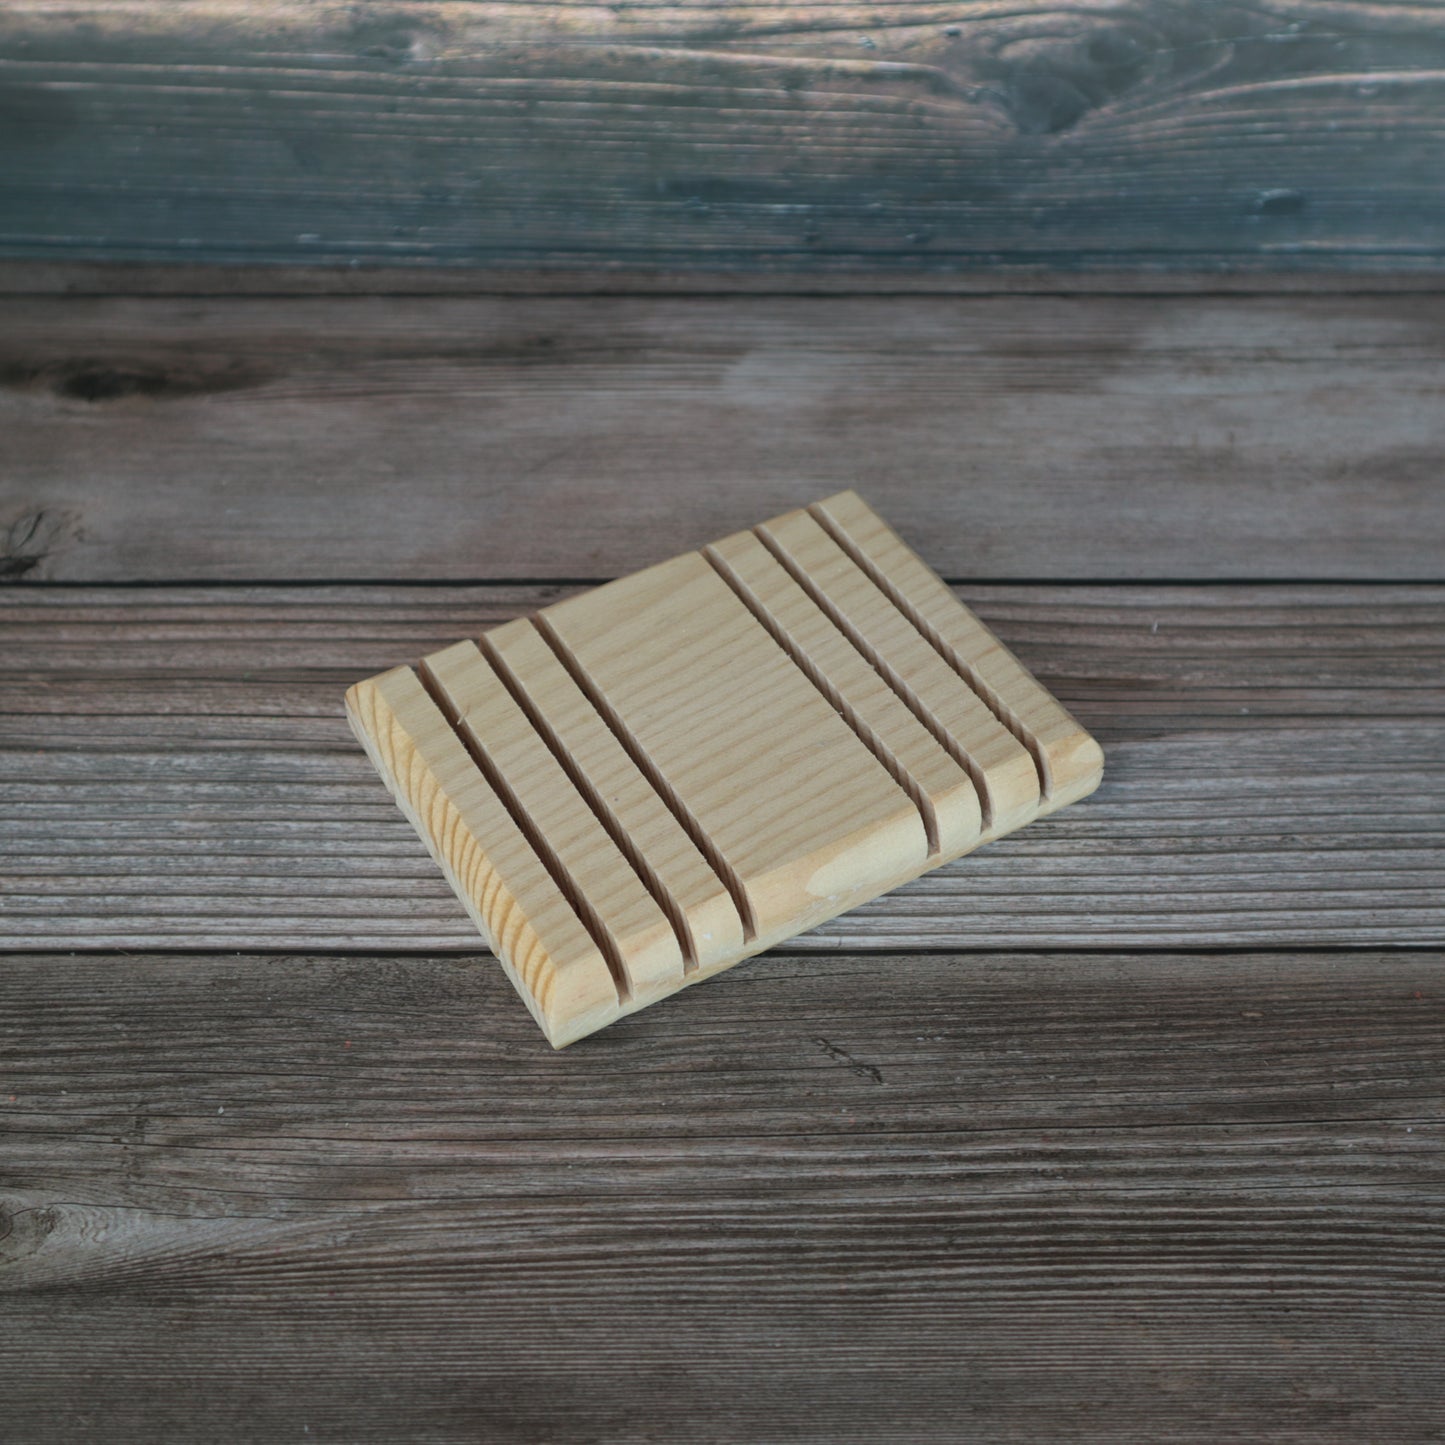 wooden soap dish with grooves in them to catch the soap